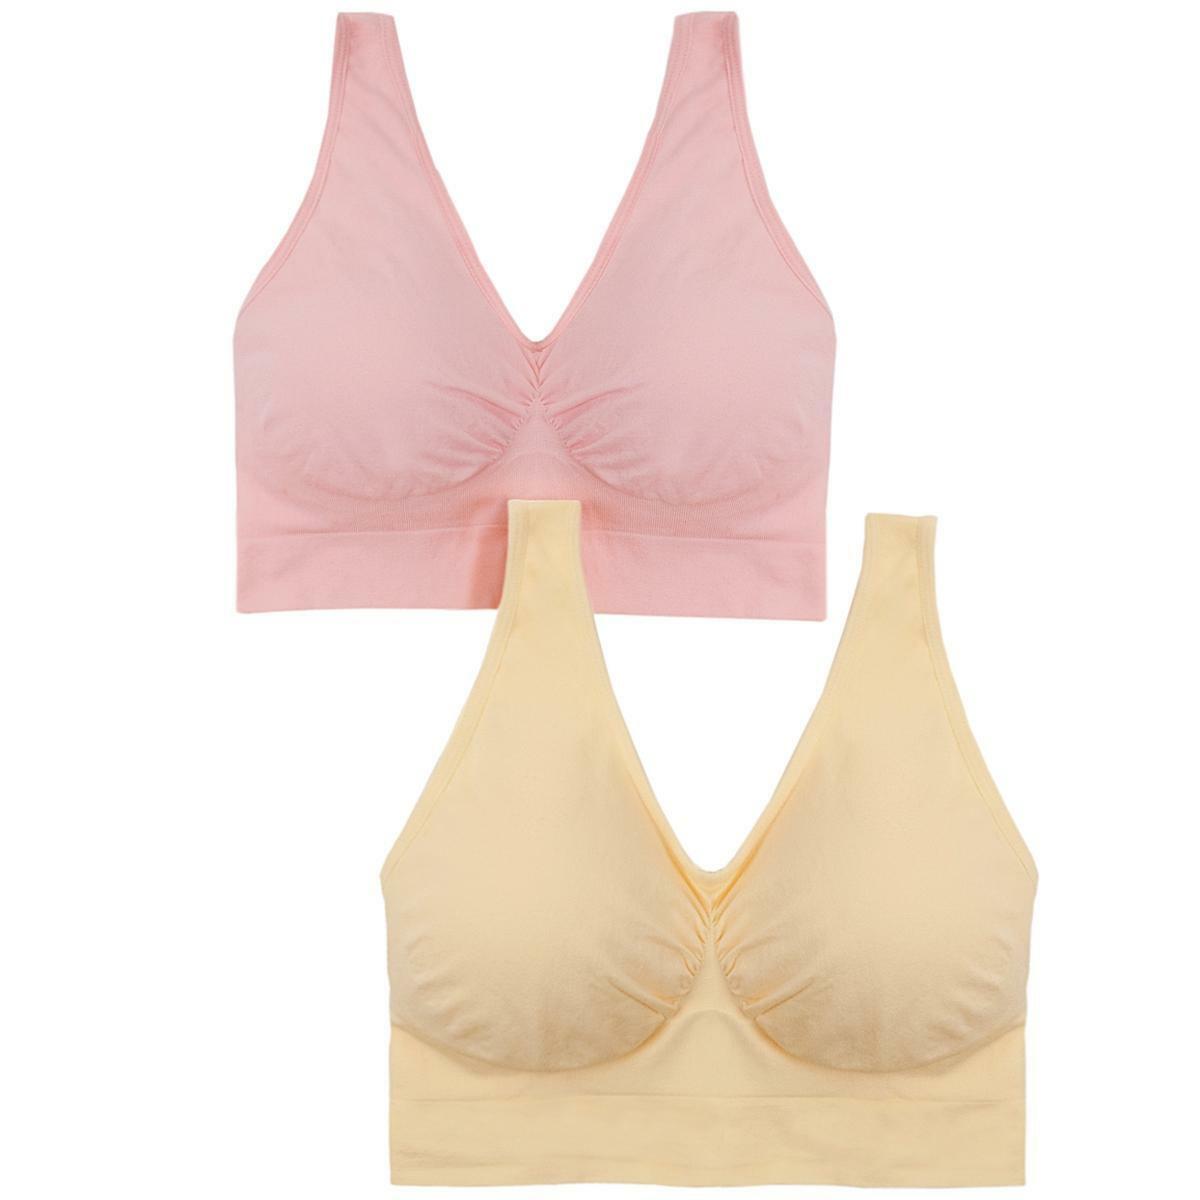 Rhonda Shear 2 Pack Ahh Bra with Removable Pads – goSASS